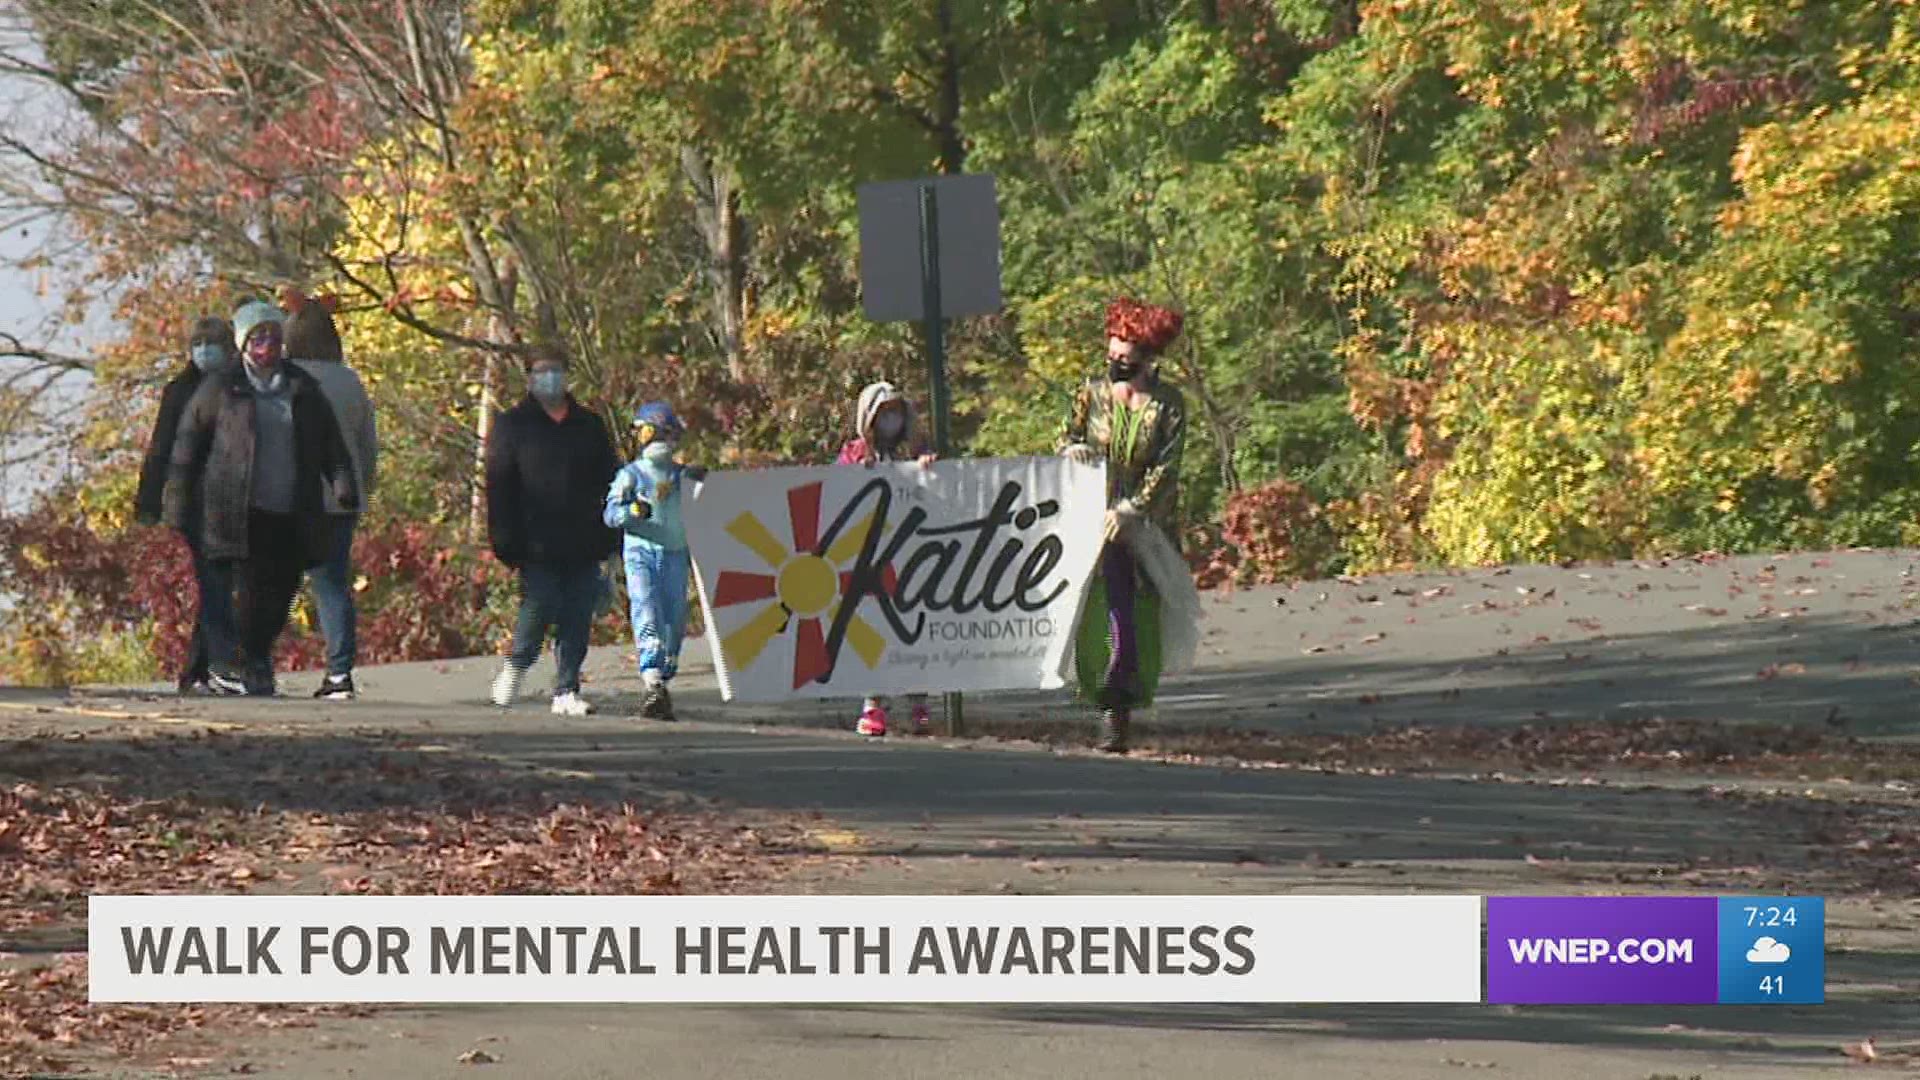 The annual event is known as "5-Kate" held in memory of Kate Shoener has become a fundraiser for mental health awareness.